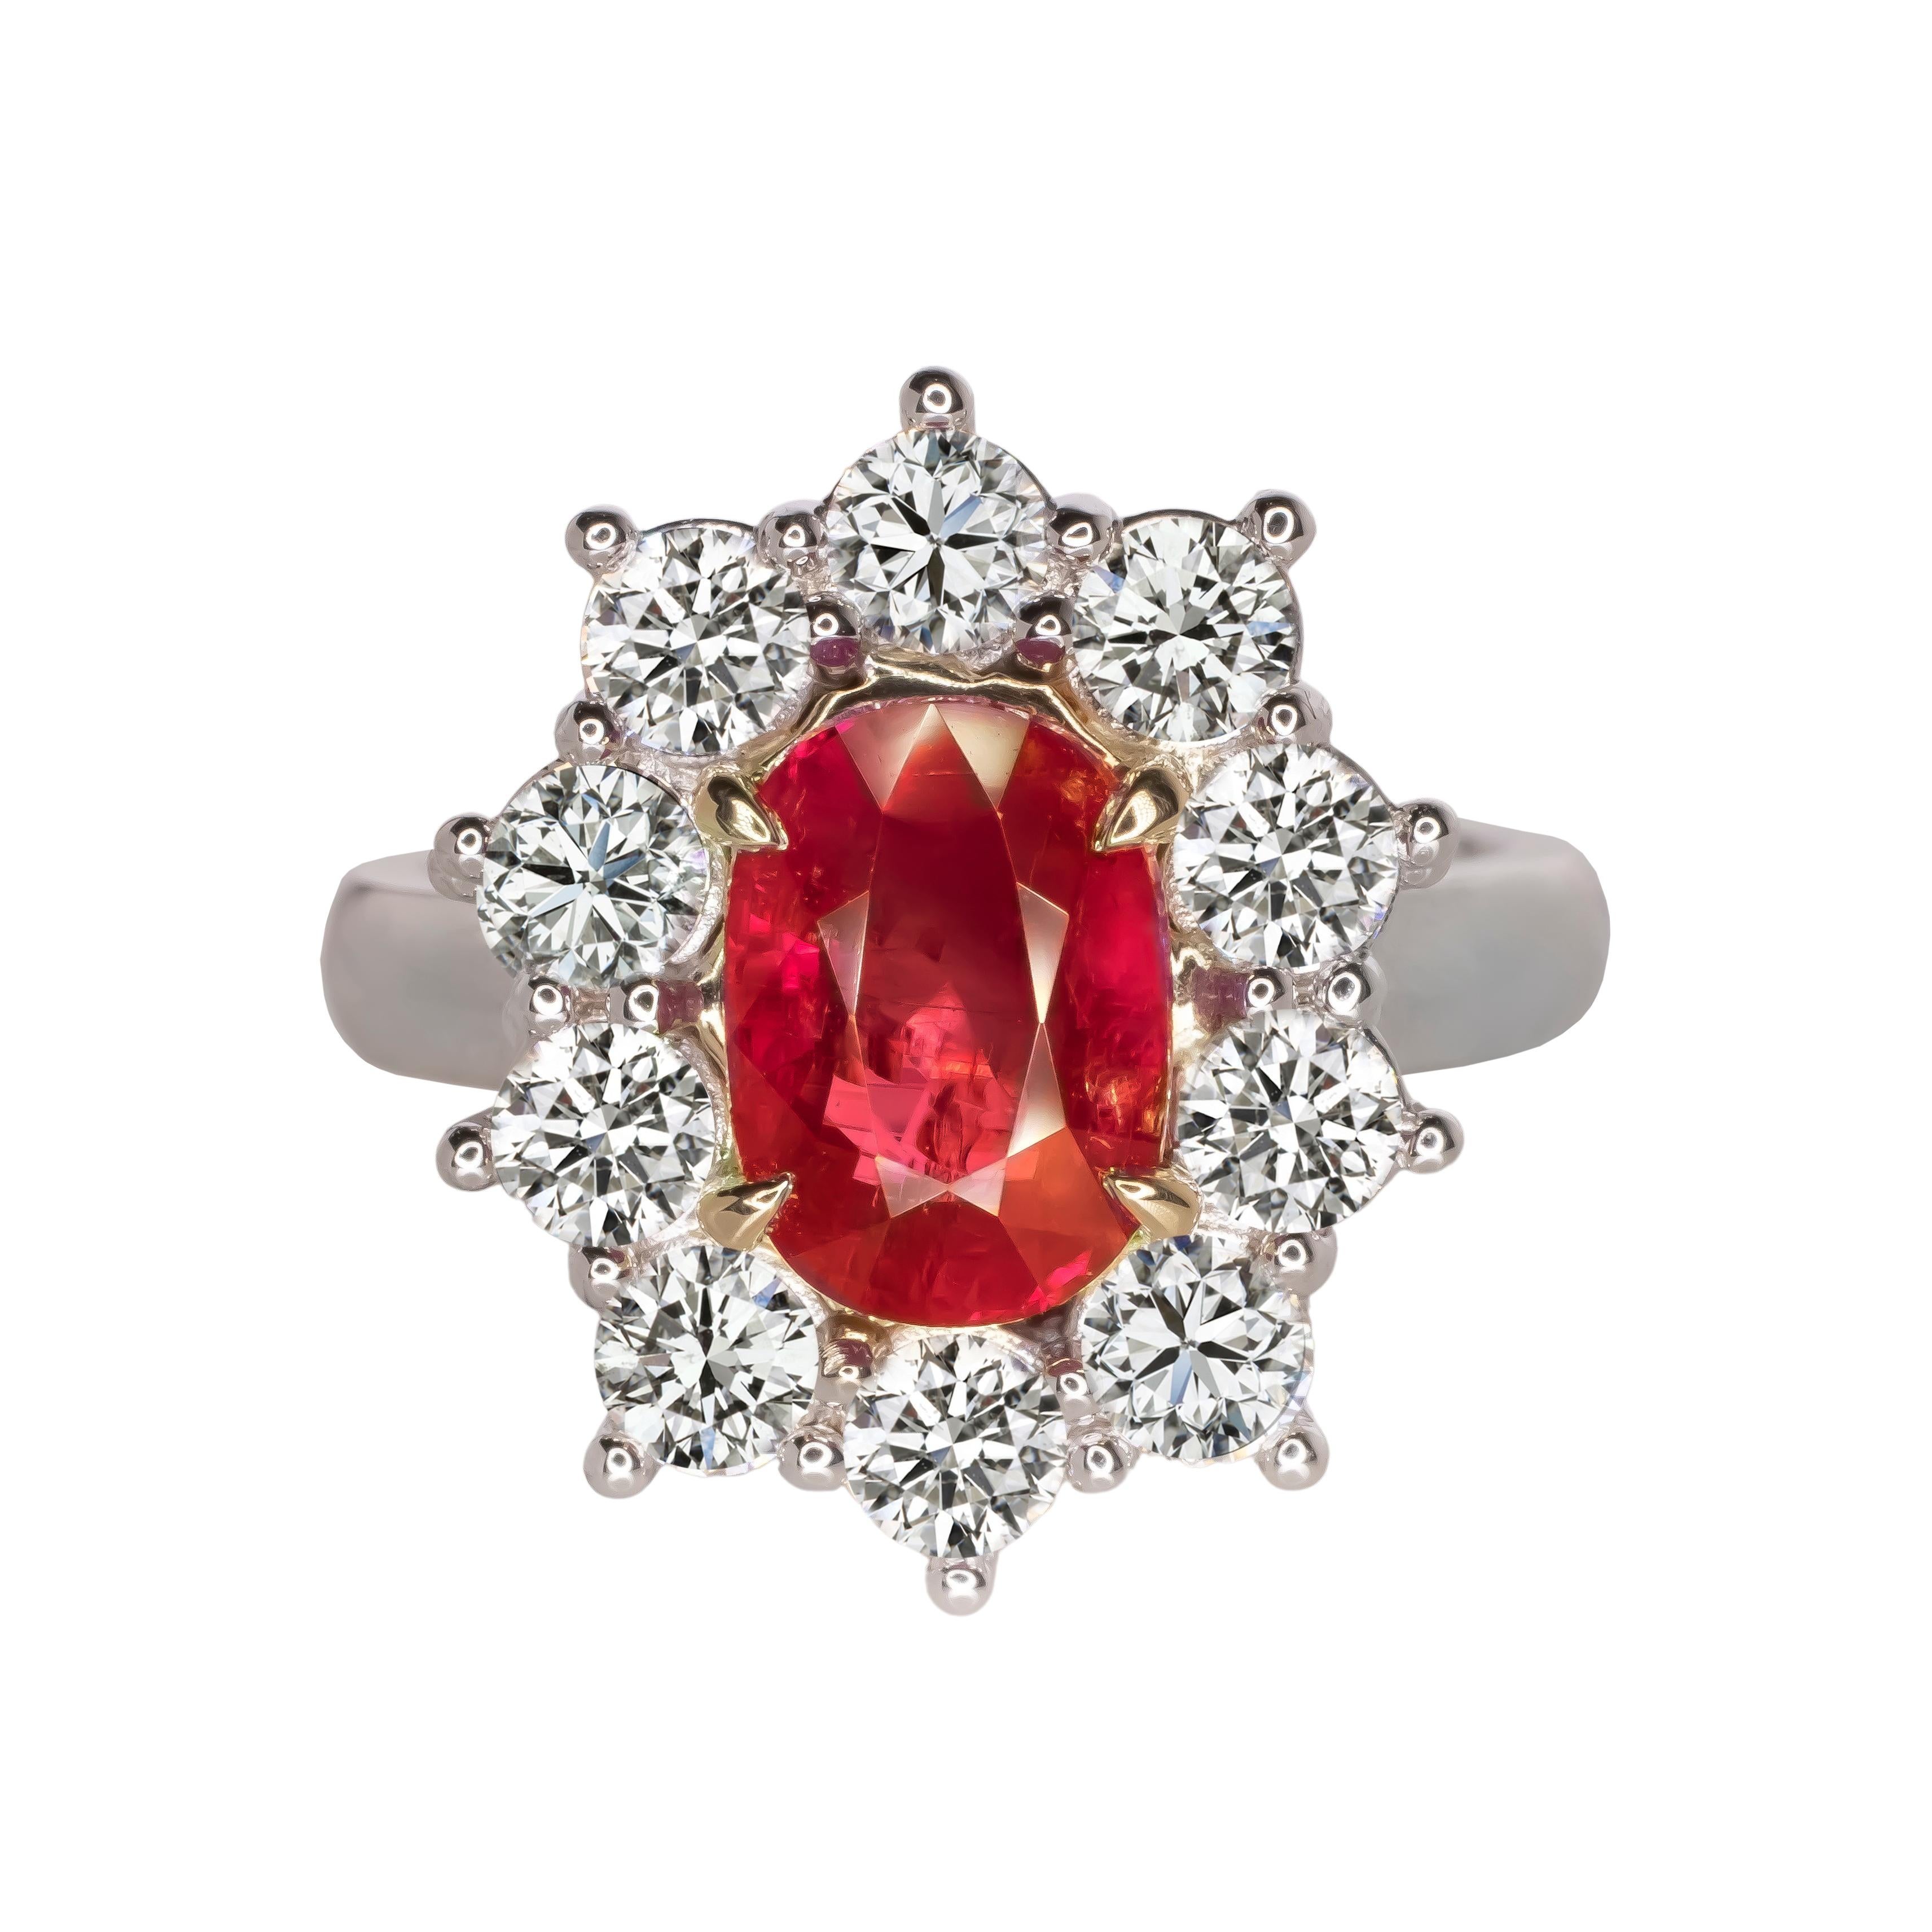 In this remarkable piece of jewelry, a truly breathtaking 4.21-carat oval-shaped ruby, exuding a vivid blood-red purple hue, certified by the esteemed GRS Switzerland, takes center stage. Set within an opulent 18-carat yellow and white gold  band,